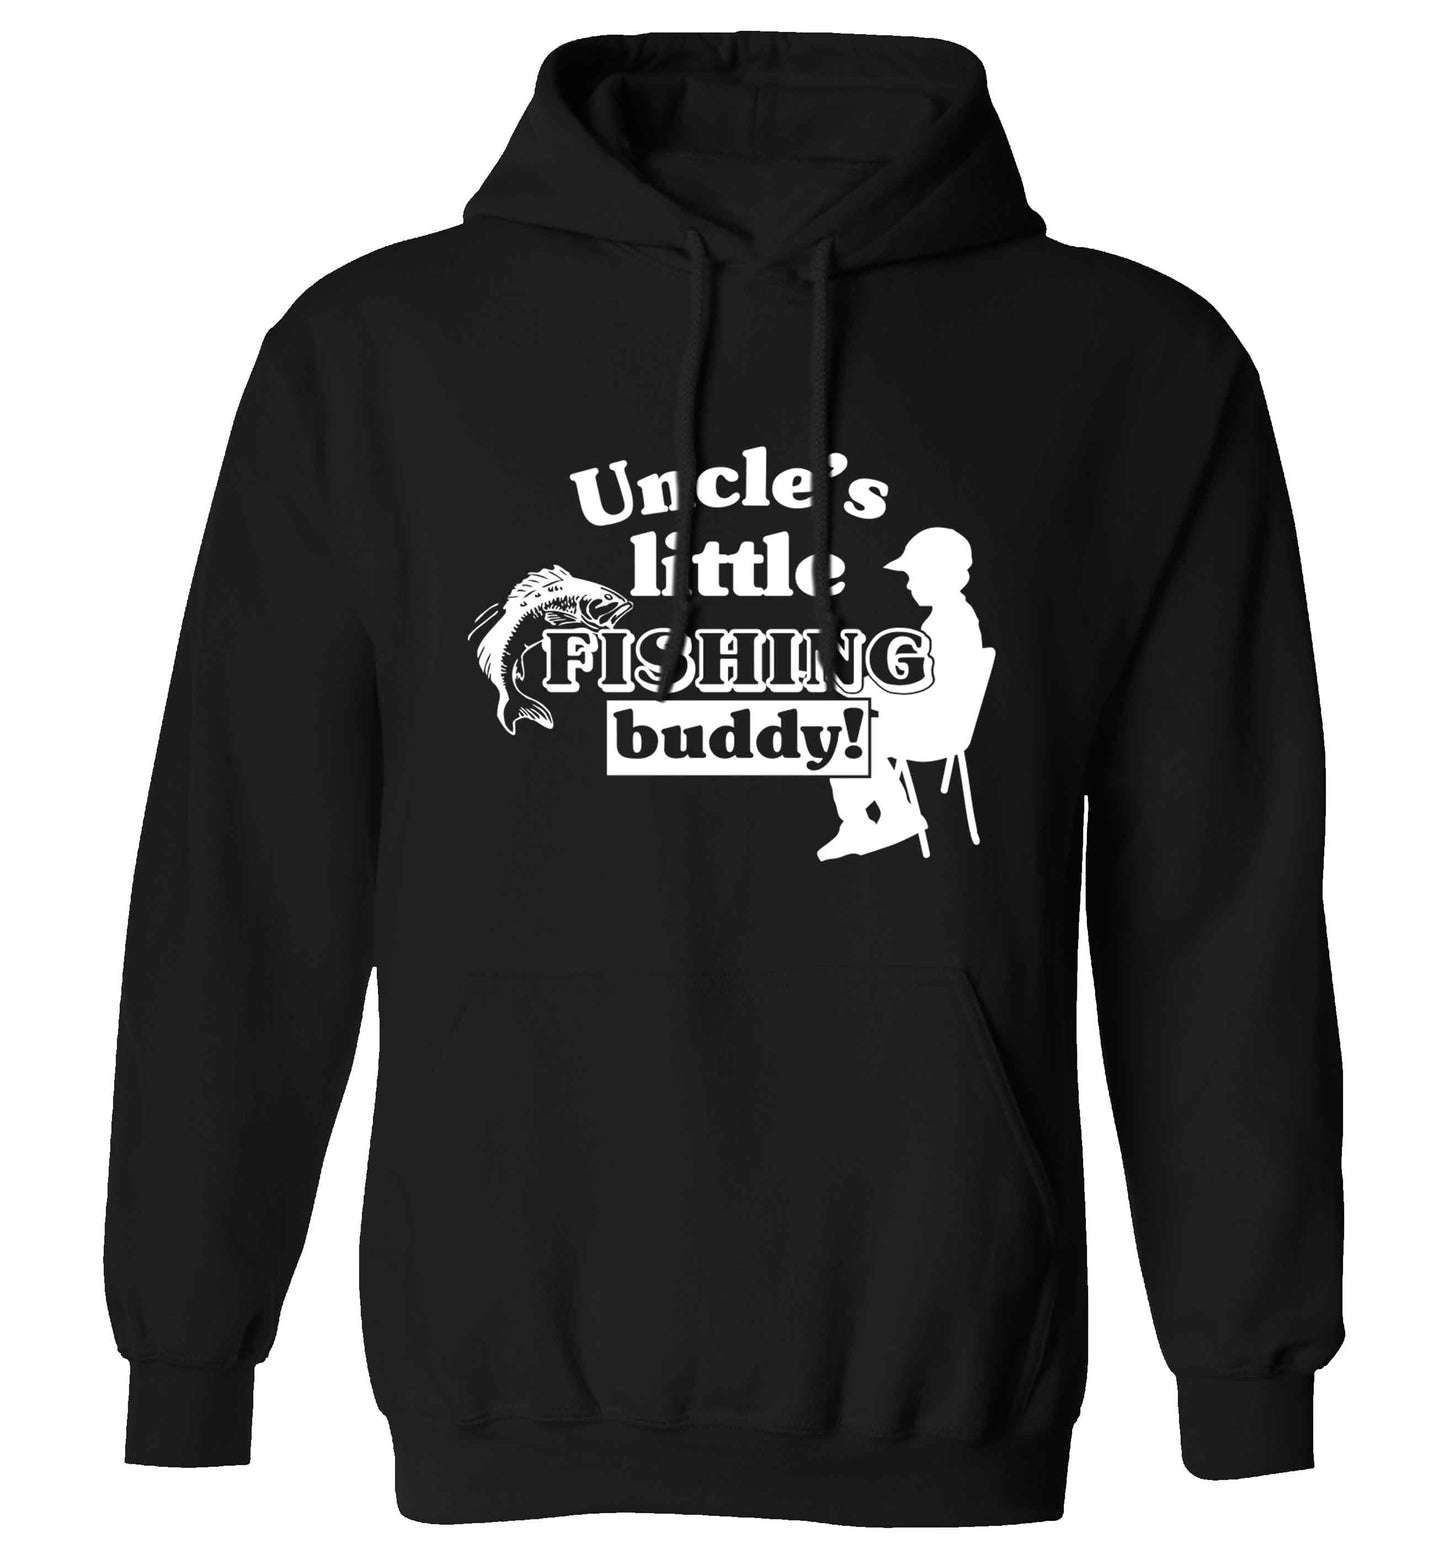 Uncle's little fishing buddy adults unisex black hoodie 2XL